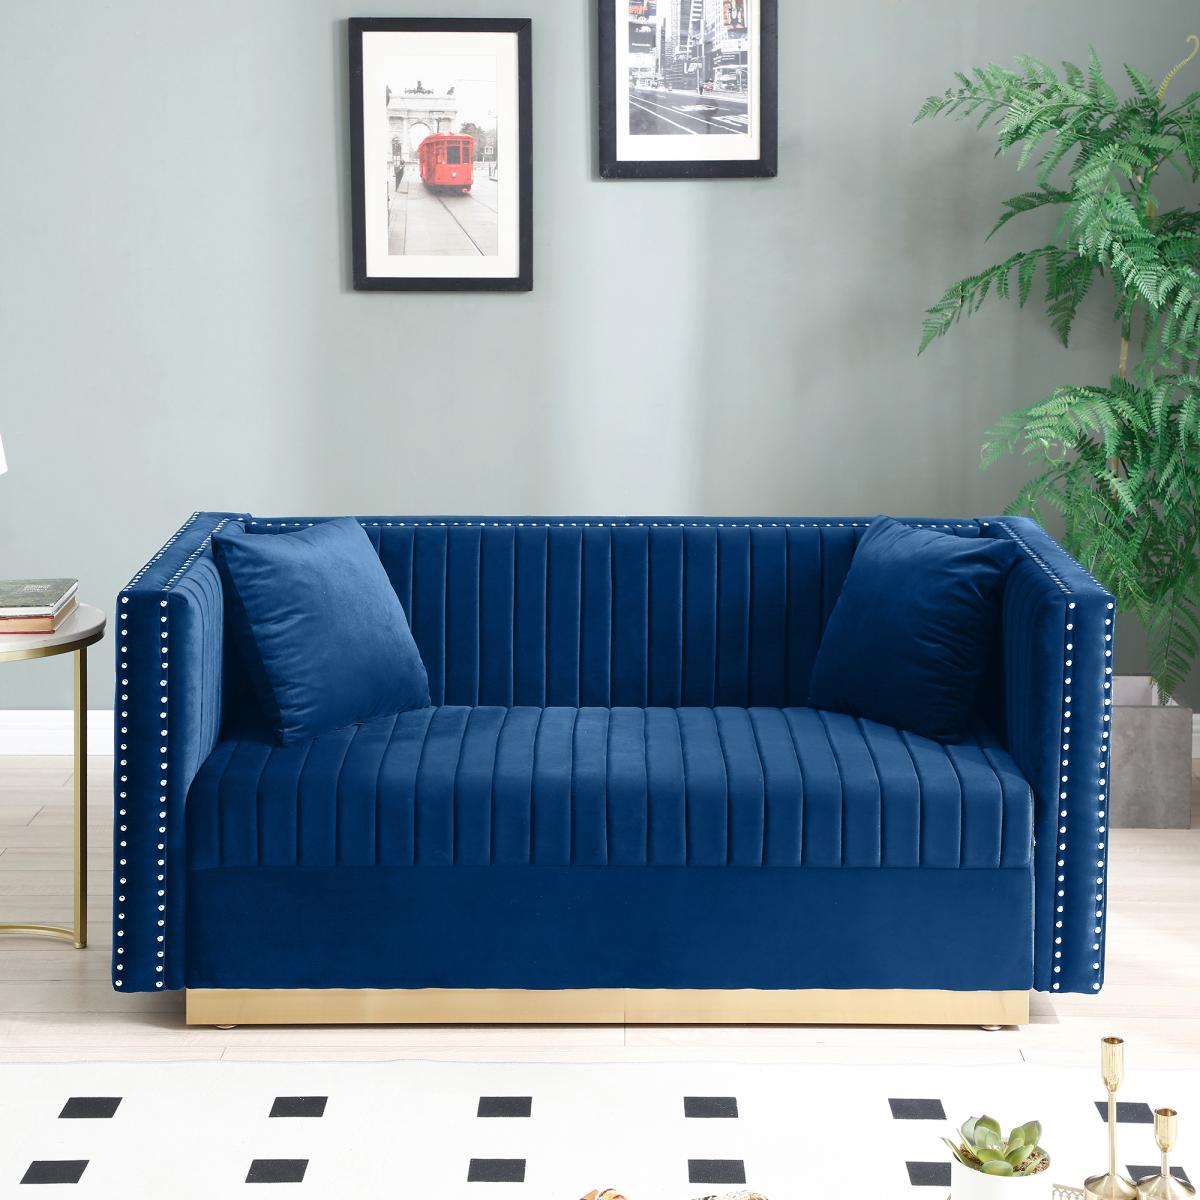 Contemporary Vertical Channel Tufted Velvet Sofa Loveseat Modern Upholstered 2 Seater Couch for Living Room Apartment with 2 pillows,Blue